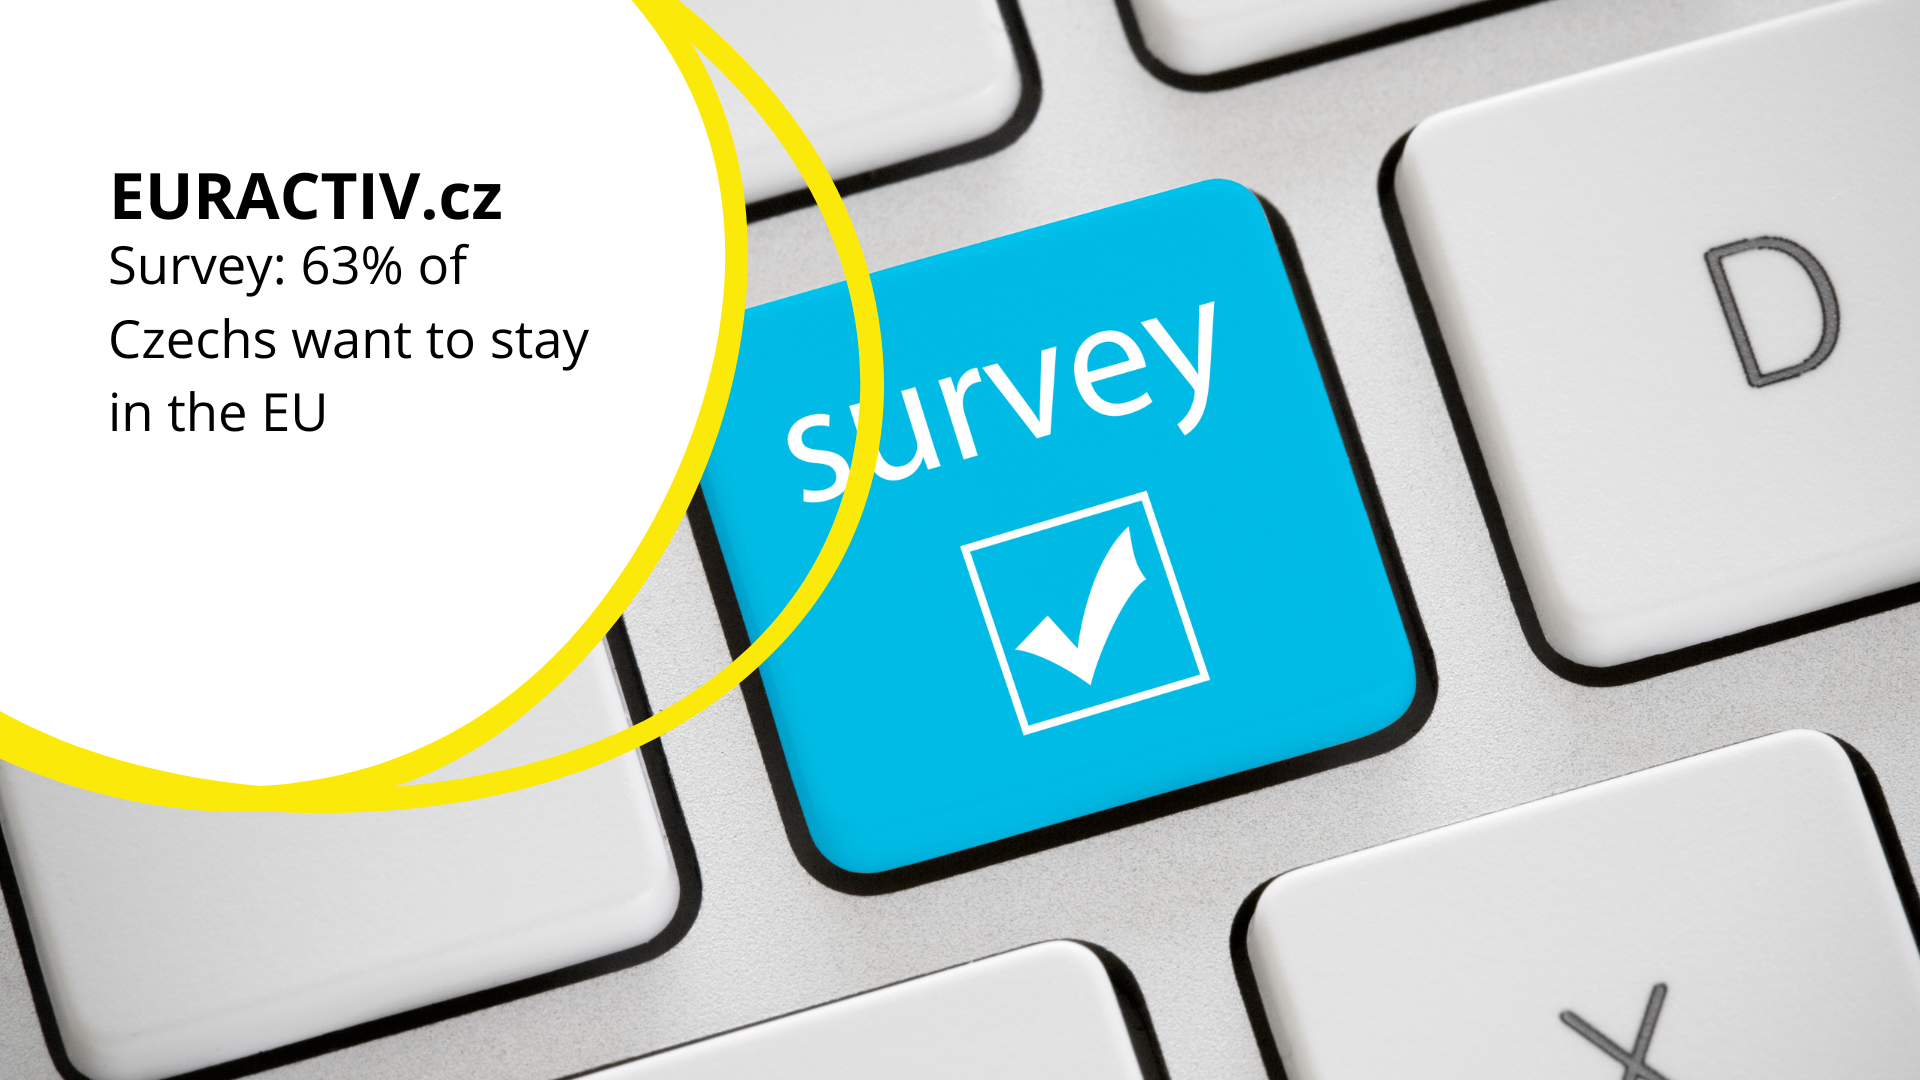 EURACTIV.cz |Survey: 63% of Czechs want to stay in the EU